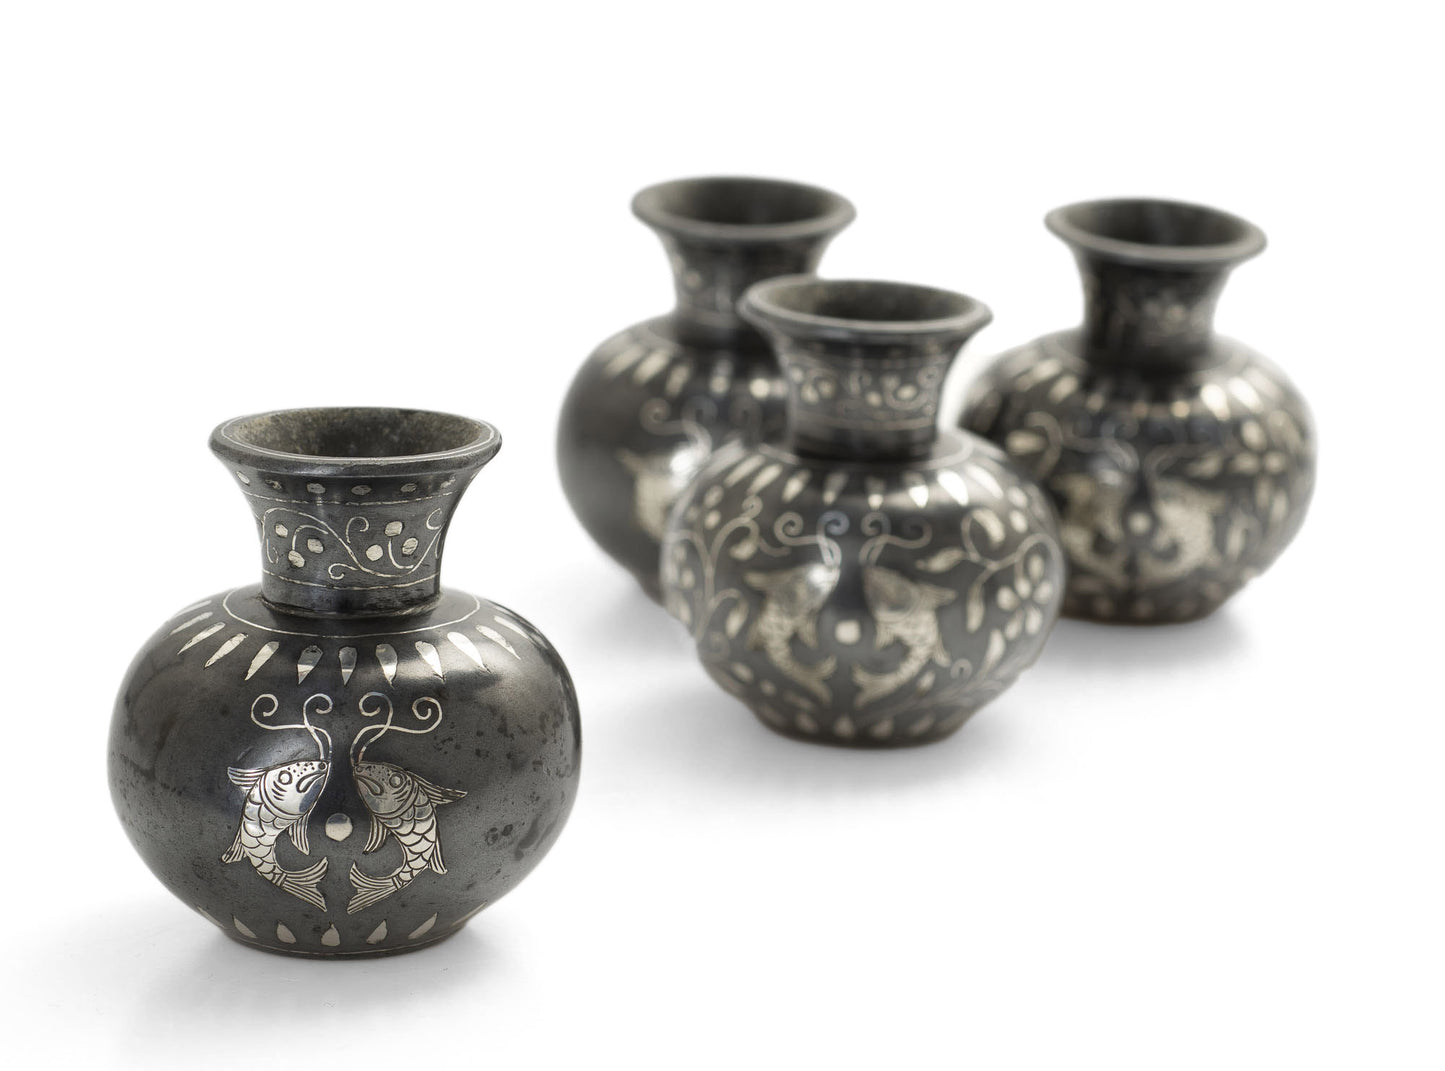 Group of Four Vintage Indian Silver Inlaid Bidri Ware Small Vases with Fish Motif (2894)